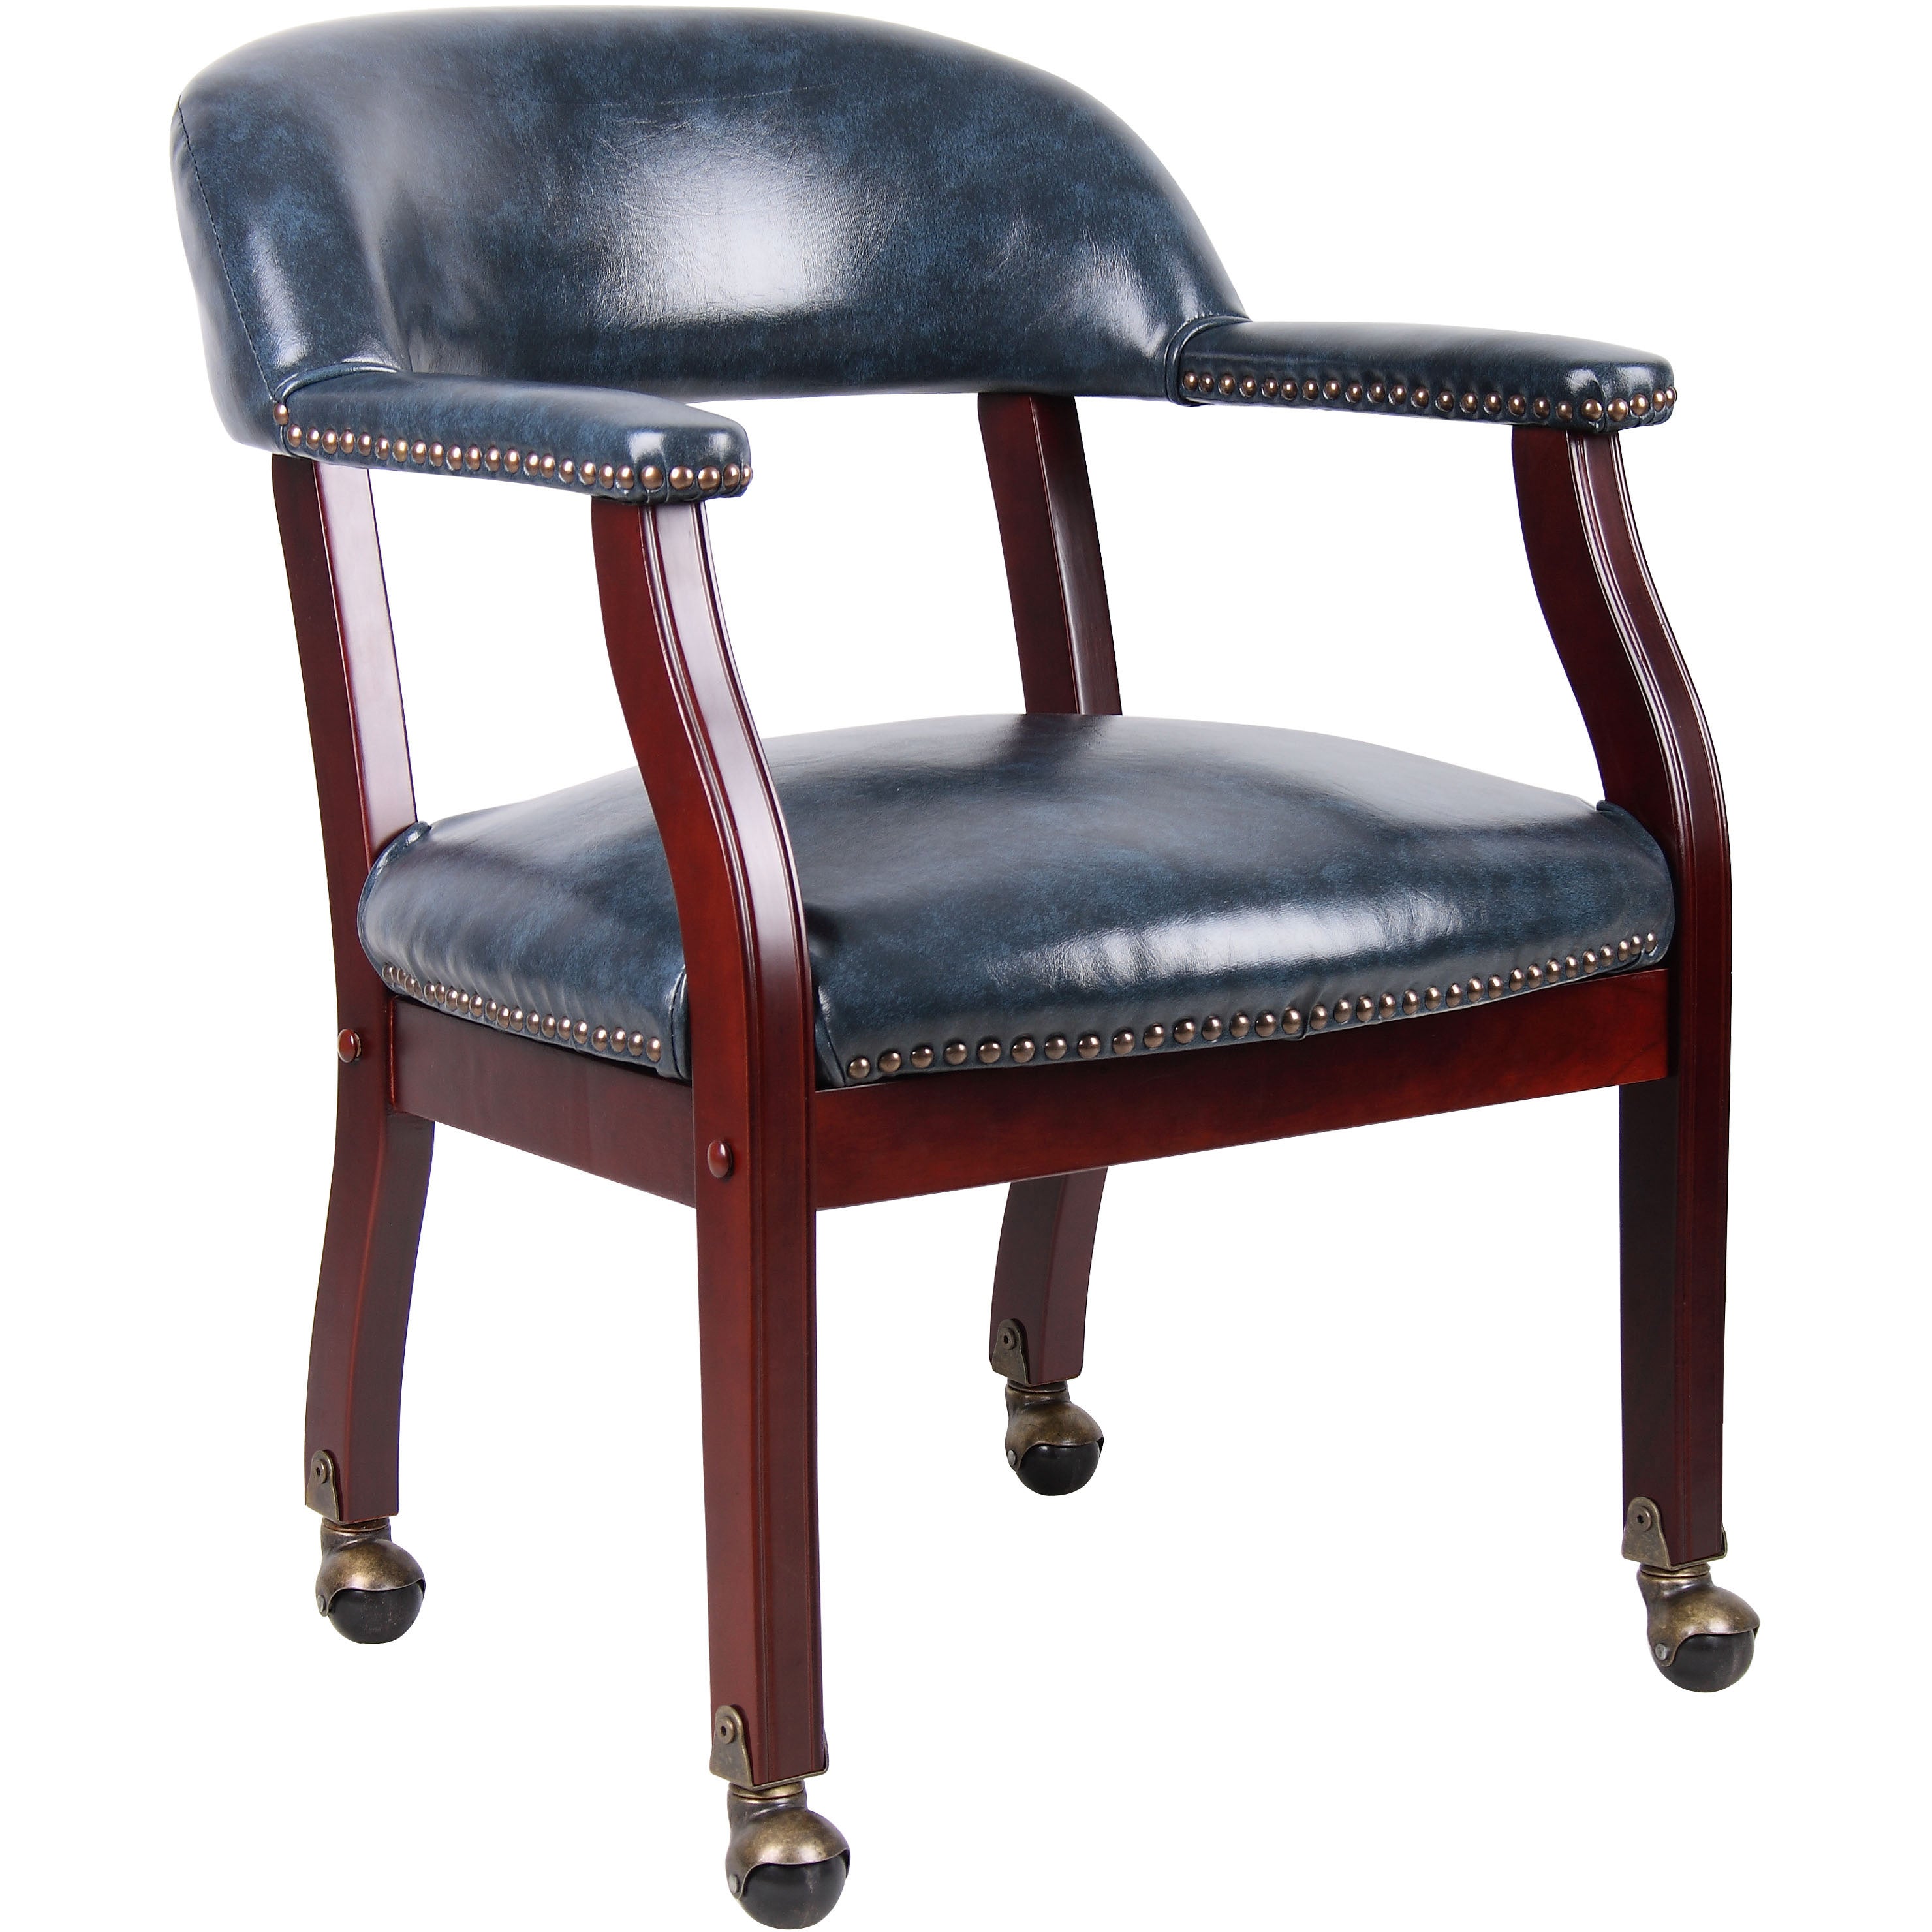 Captain's guest, accent or dining chair in Blue Vinyl with Casters, B9545-BE